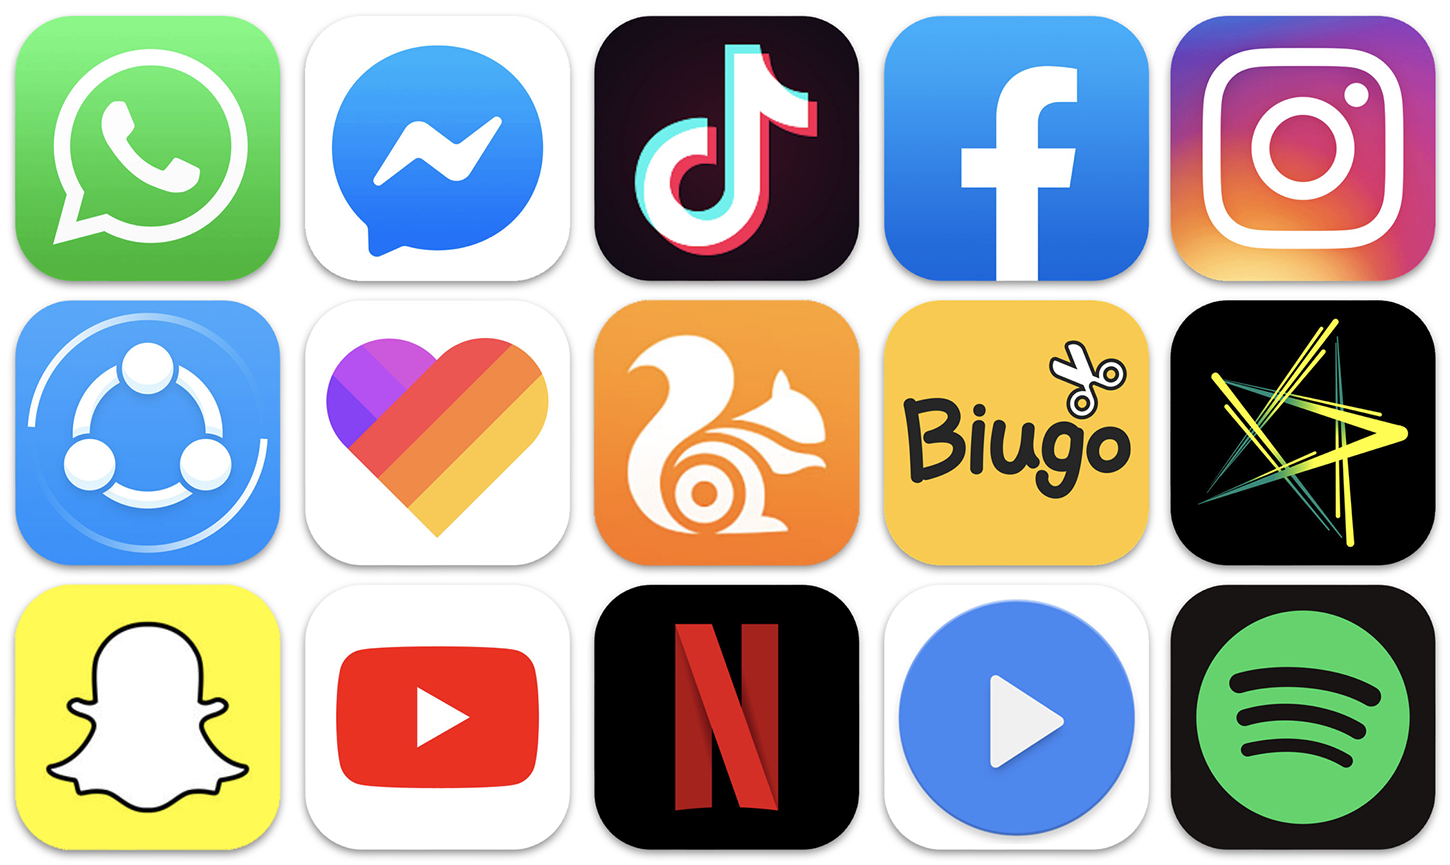 Top Apps Worldwide for Q1 2019 by Downloads